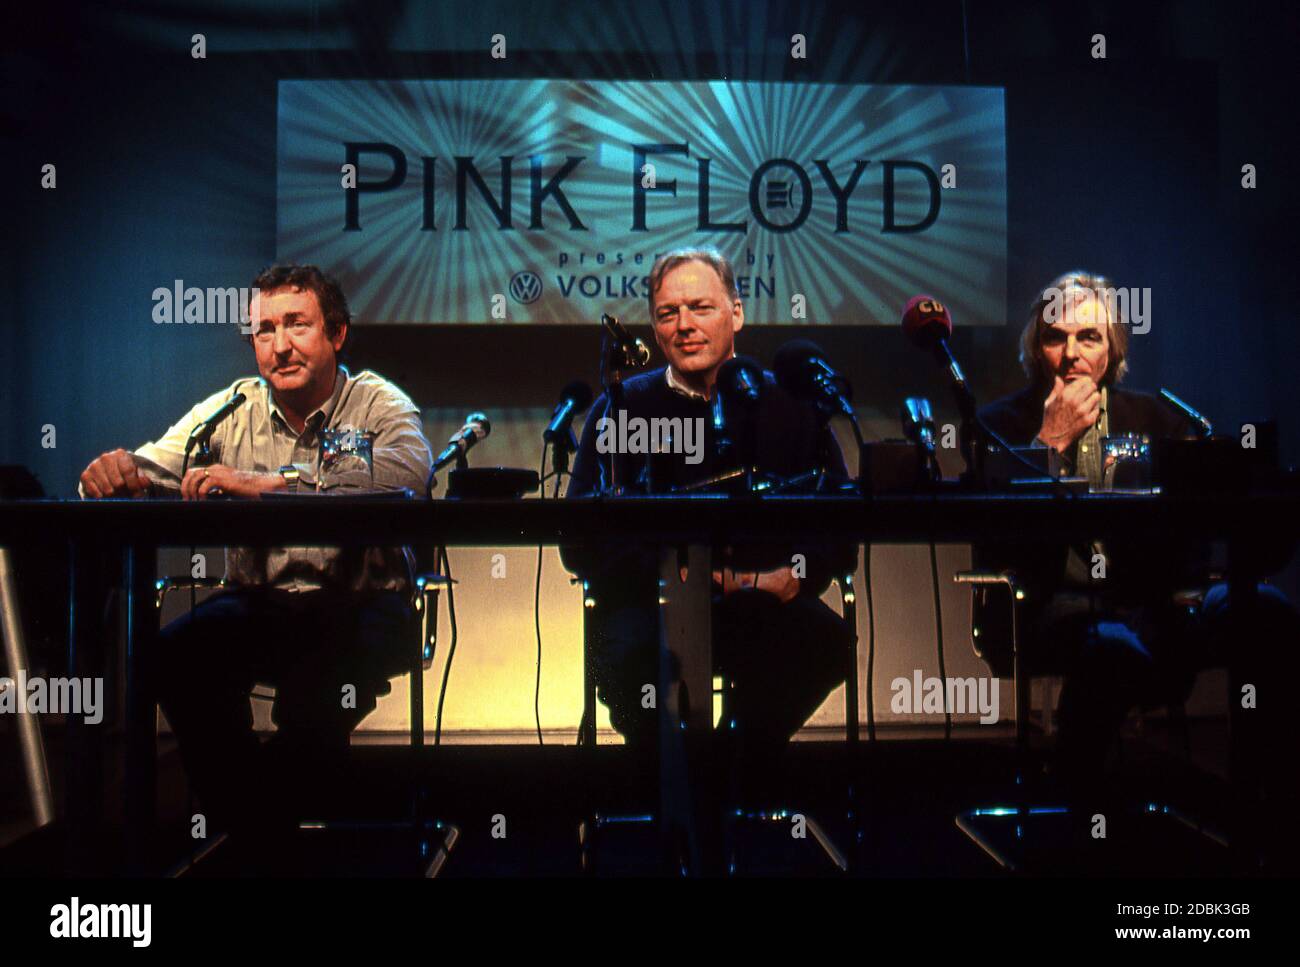 Pink Floyd press conference 1993 Stock Photo